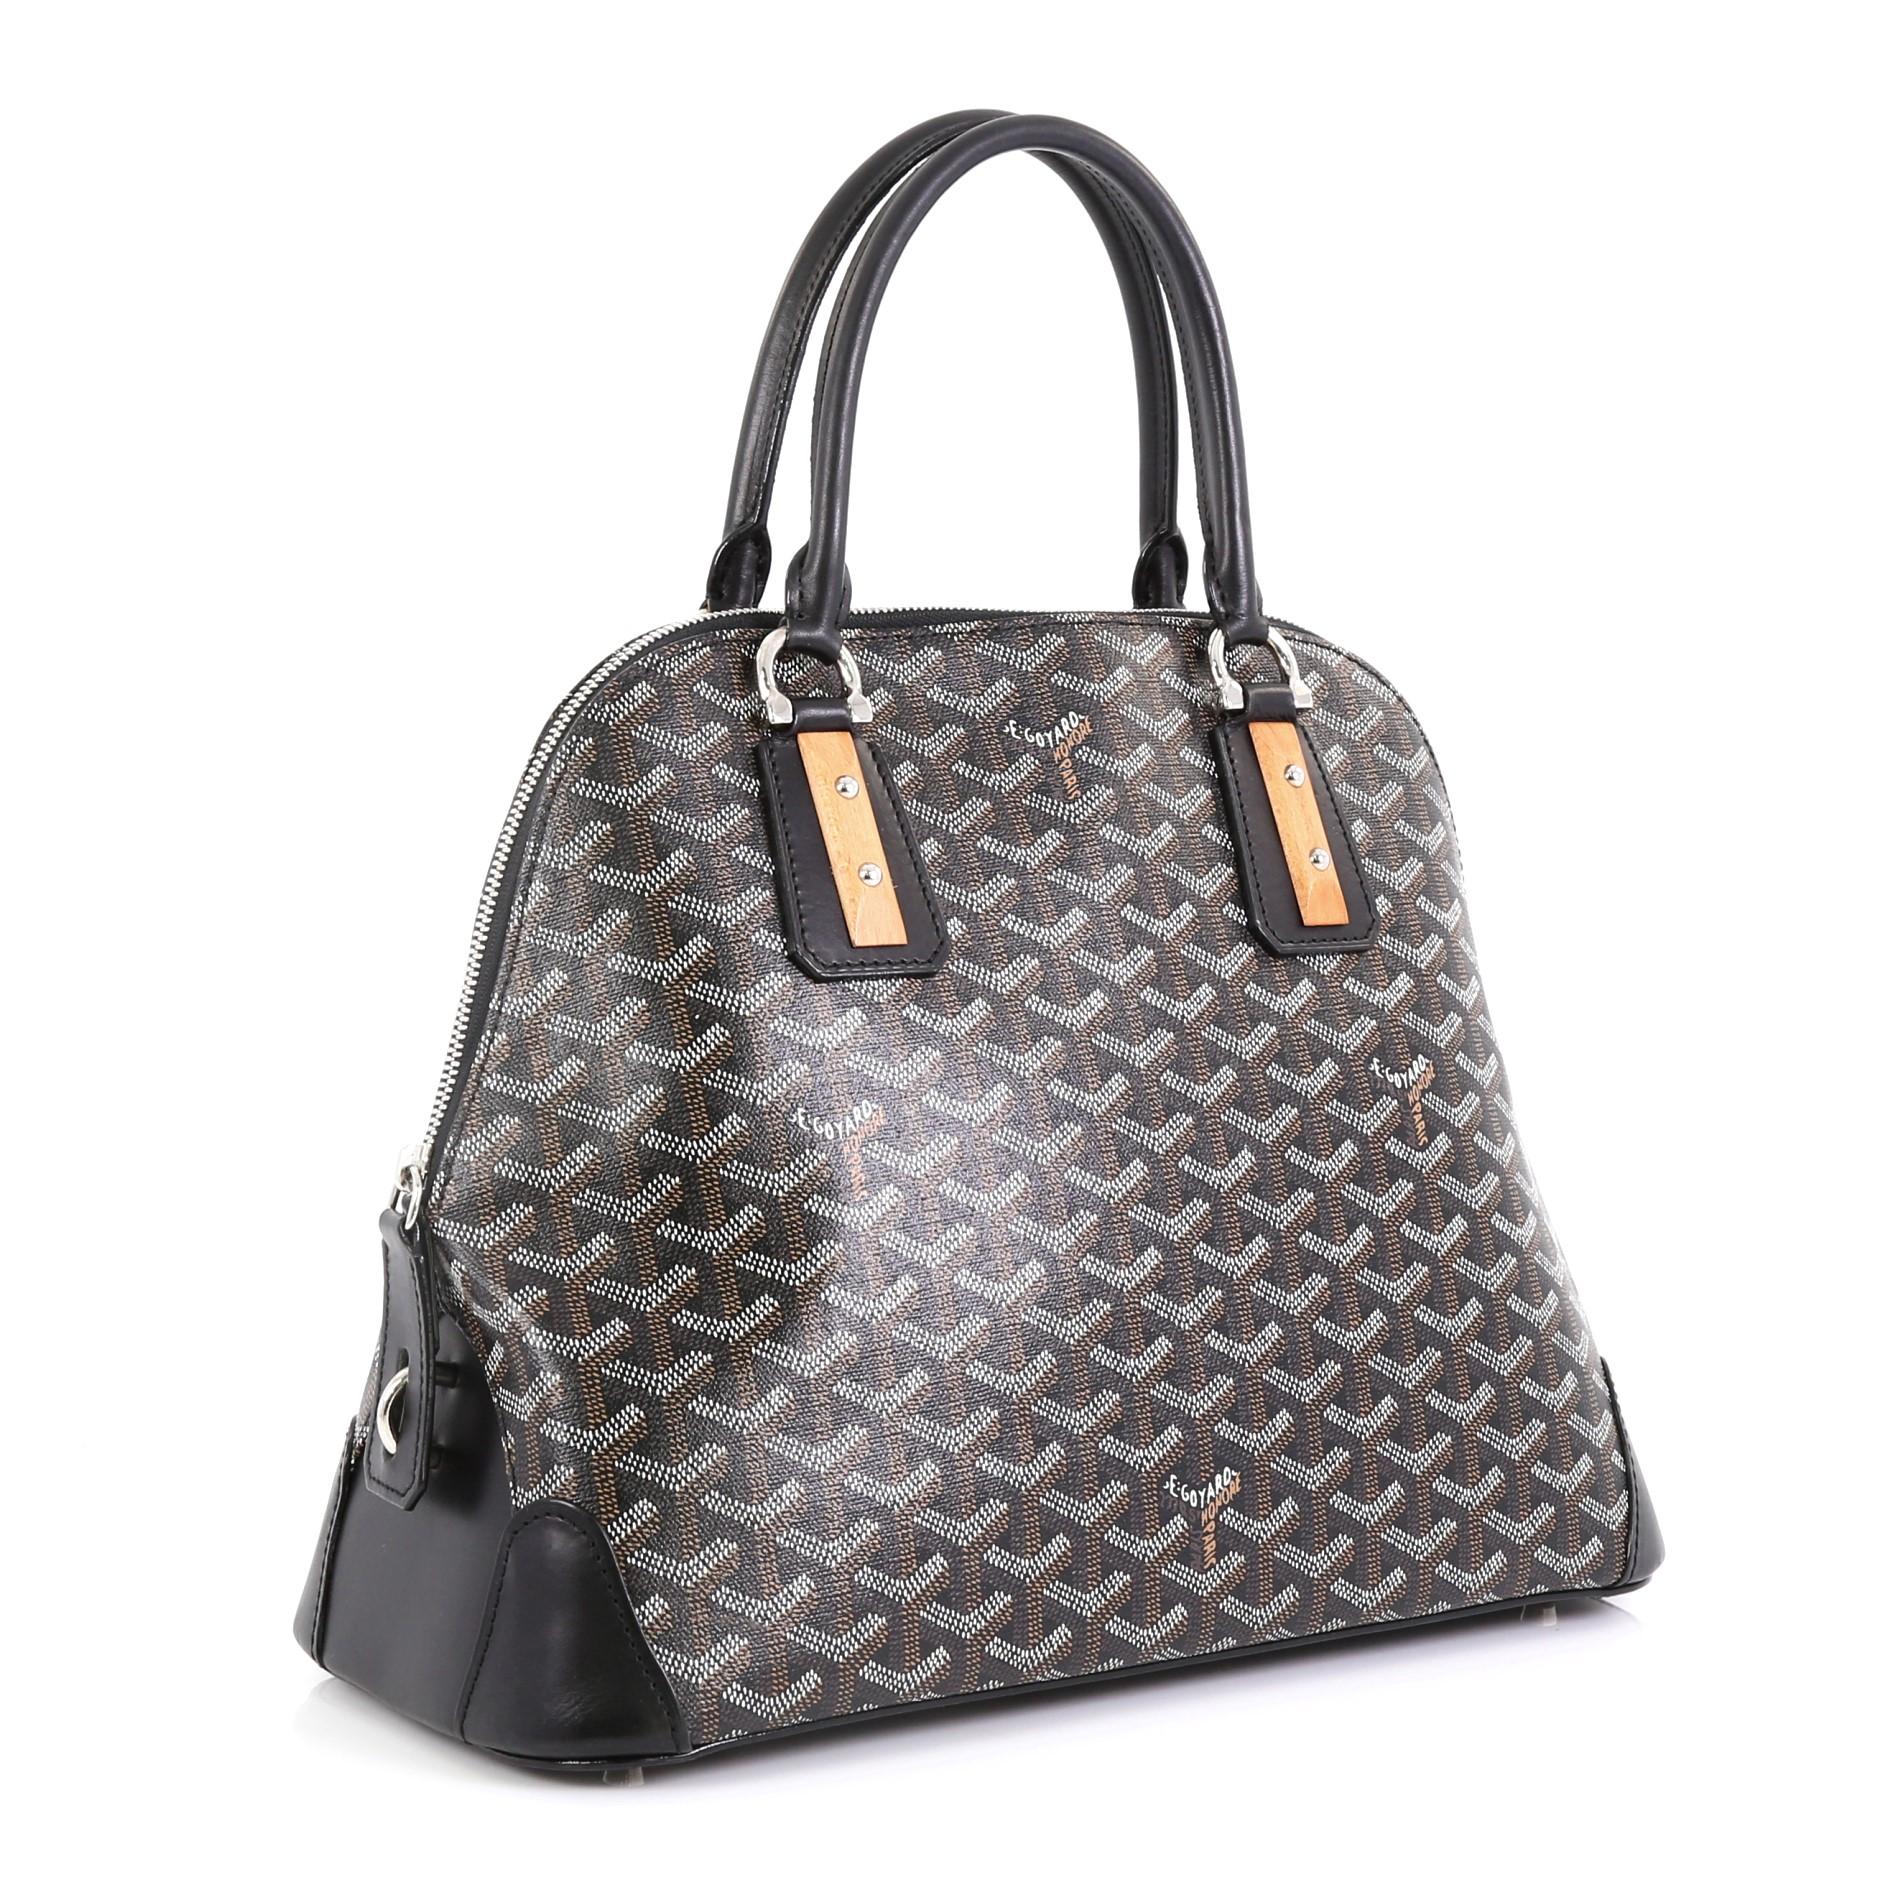 This Goyard Sac Vendome Handbag Coated Canvas PM, crafted from black and brown coated canvas, features dual rolled handles with wooden and stud details, leather trim, protective base studs, and silver-tone hardware. Its zip closure opens to a yellow